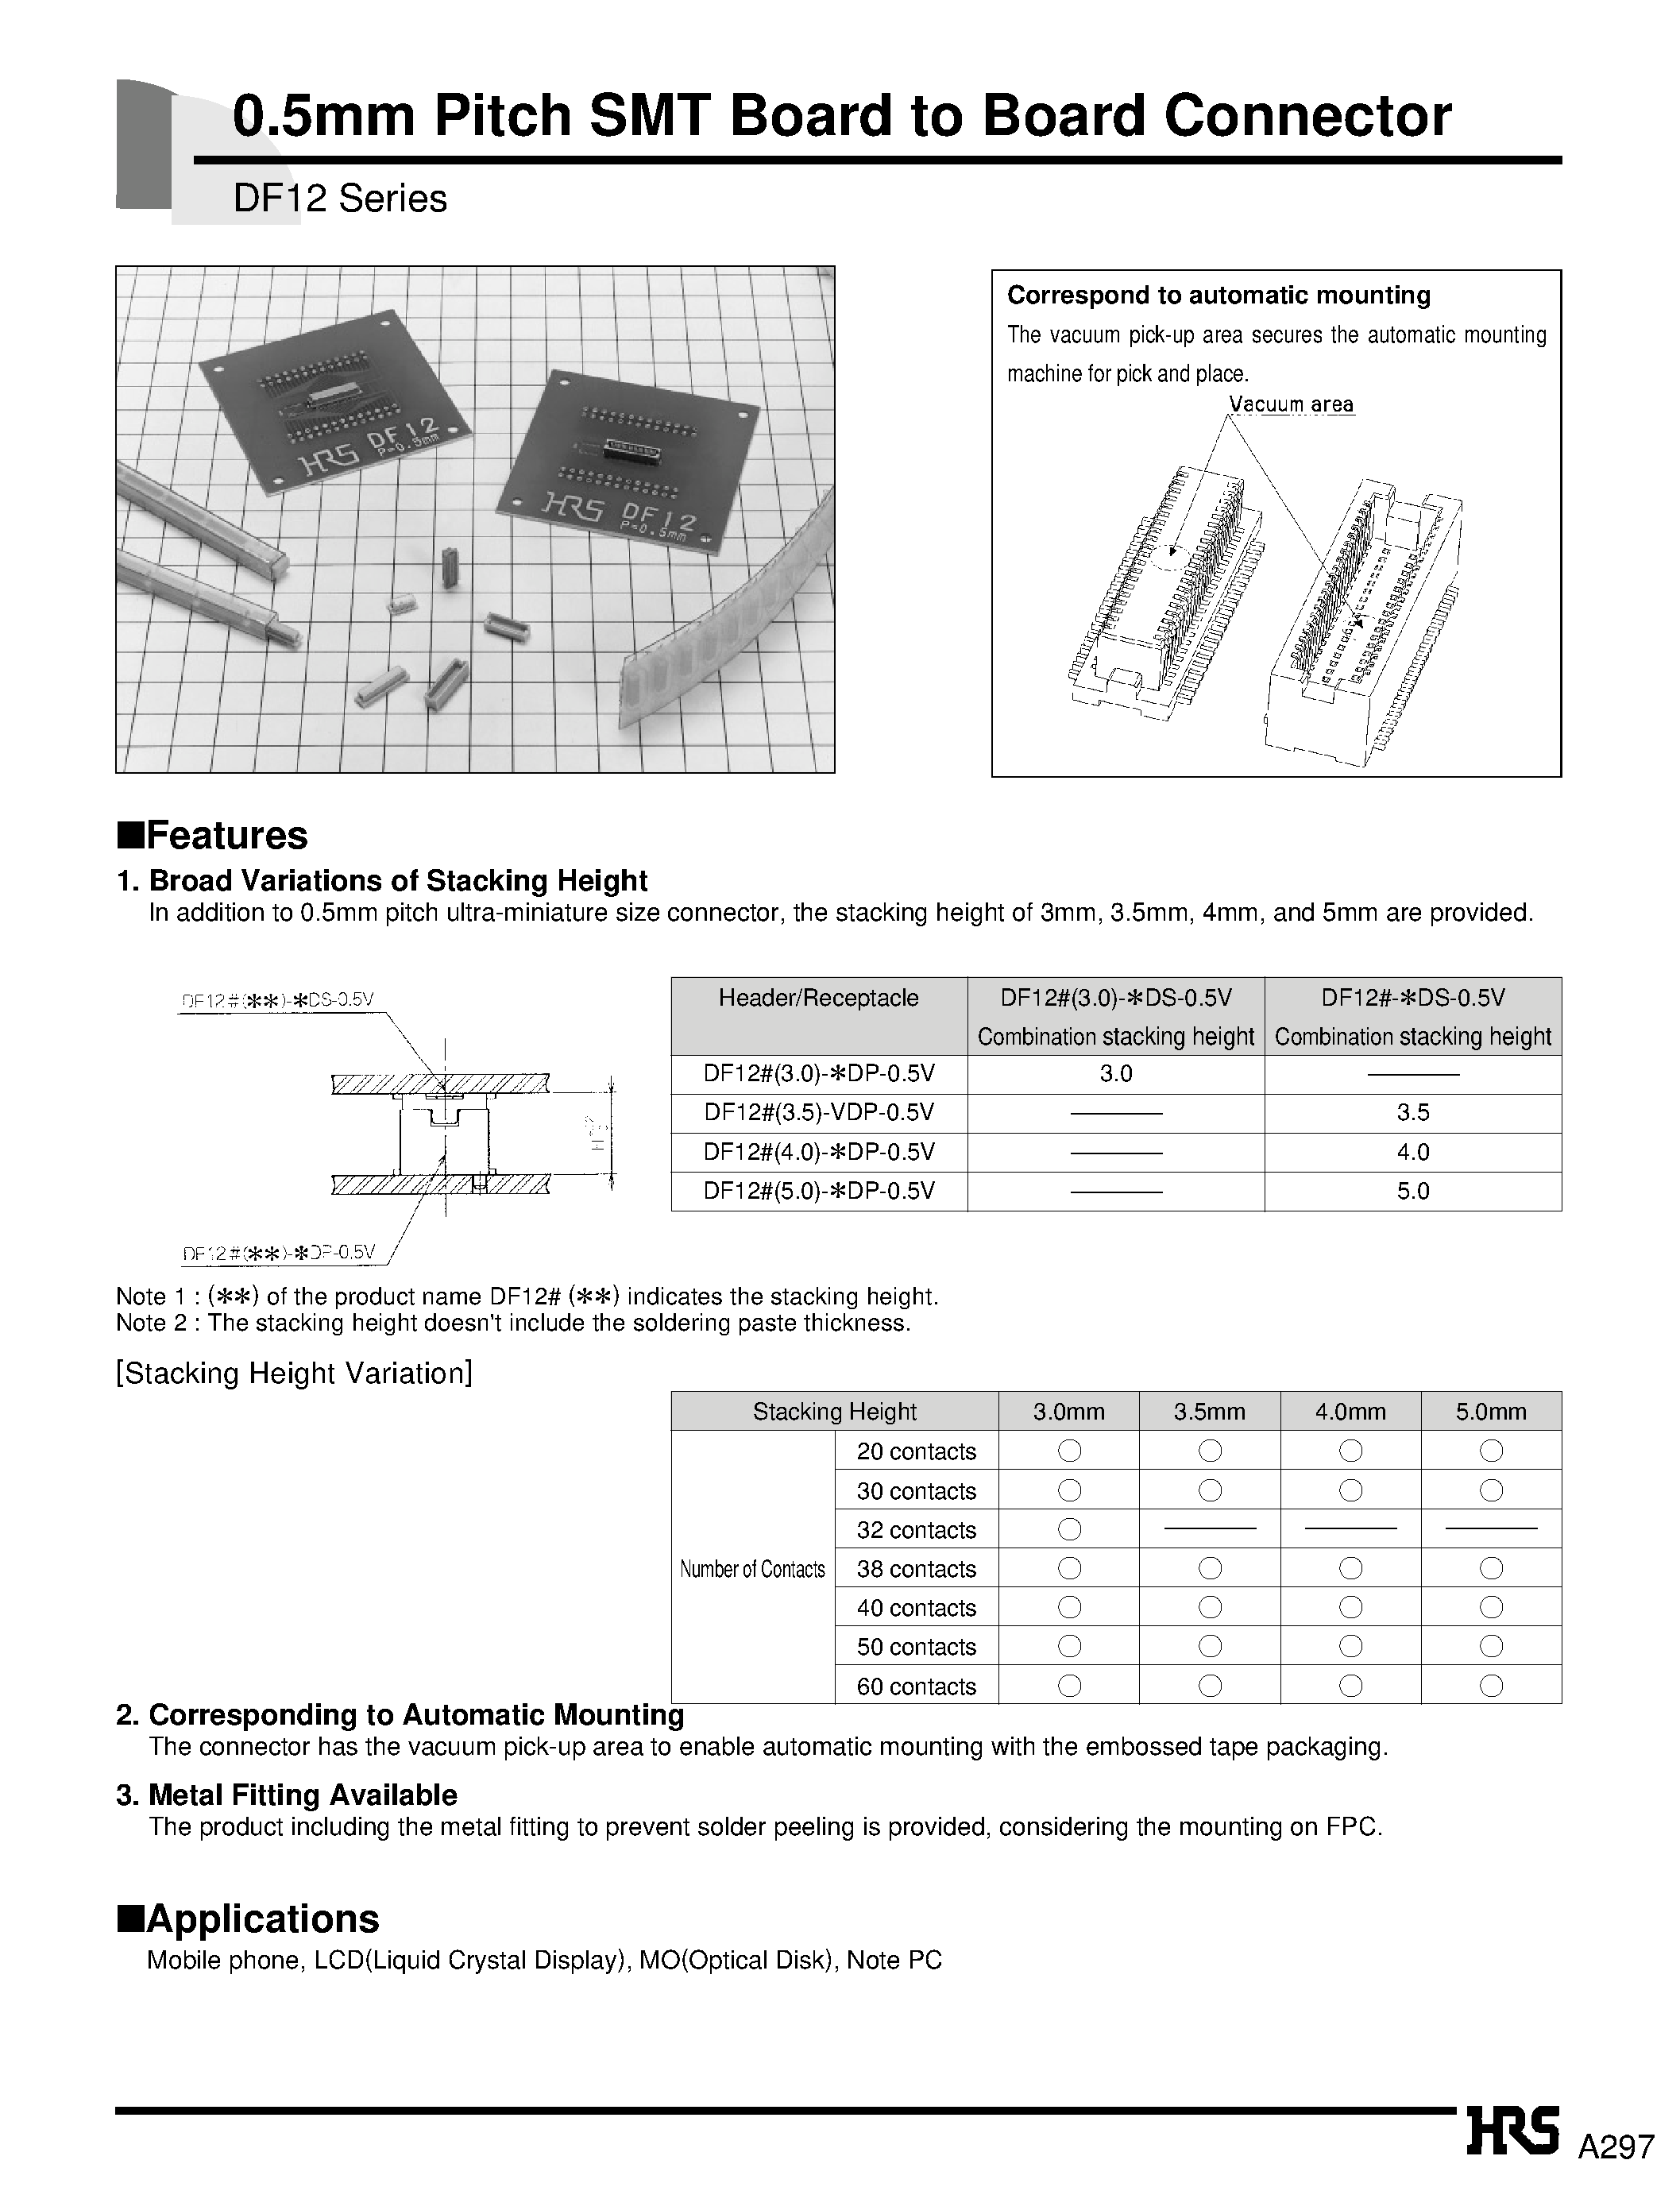 Datasheet DF12A-60DP-0.5V - 0.5mm Pitch SMT Board to Board Connector page 1